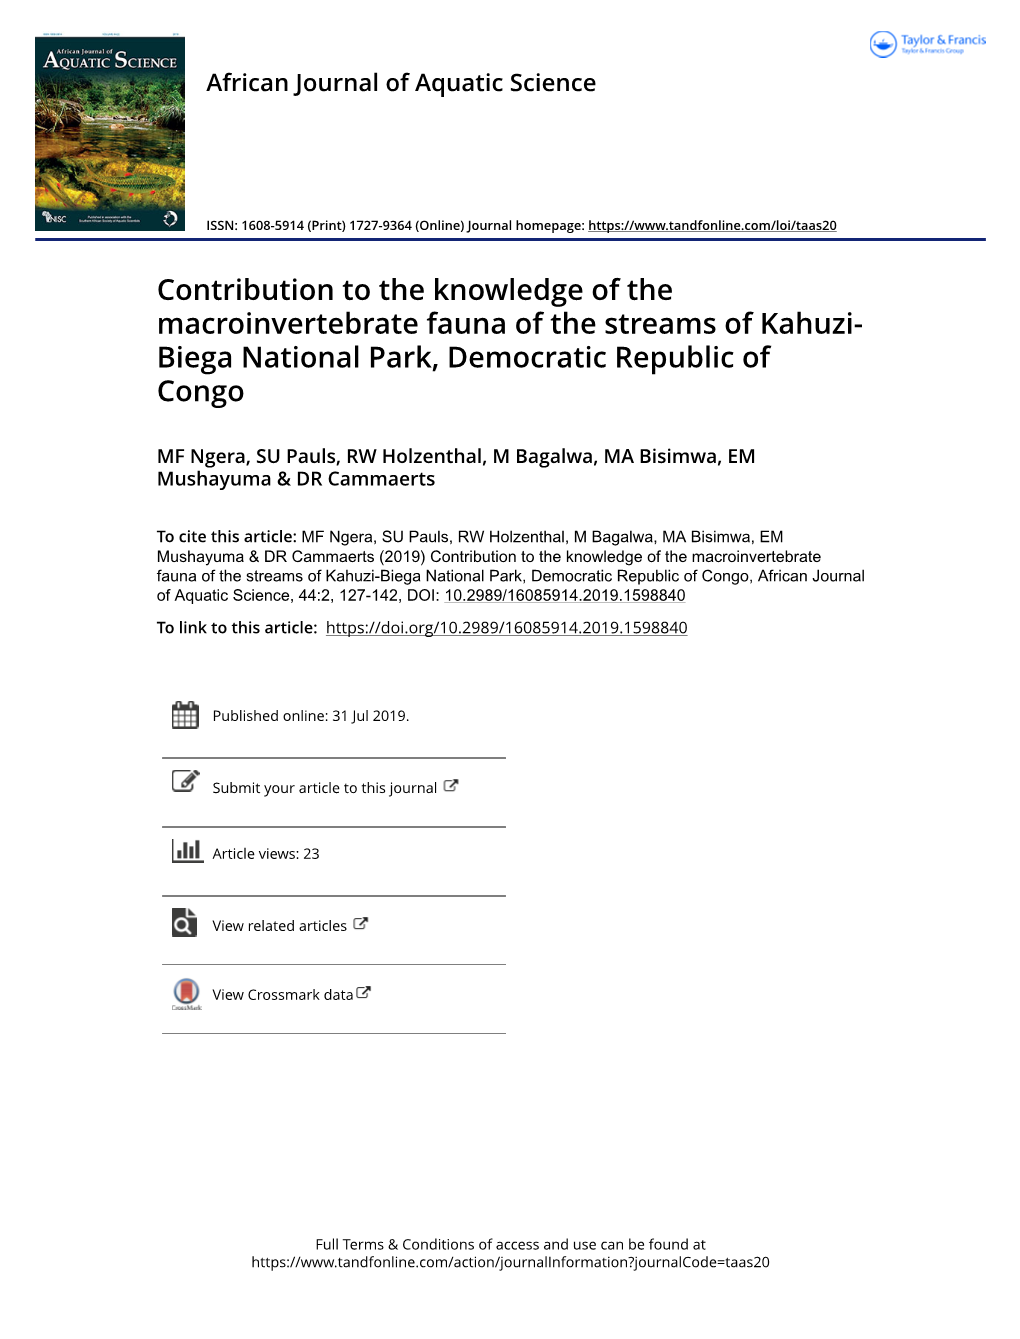 Contribution to the Knowledge of the Macroinvertebrate Fauna of the Streams of Kahuzi- Biega National Park, Democratic Republic of Congo